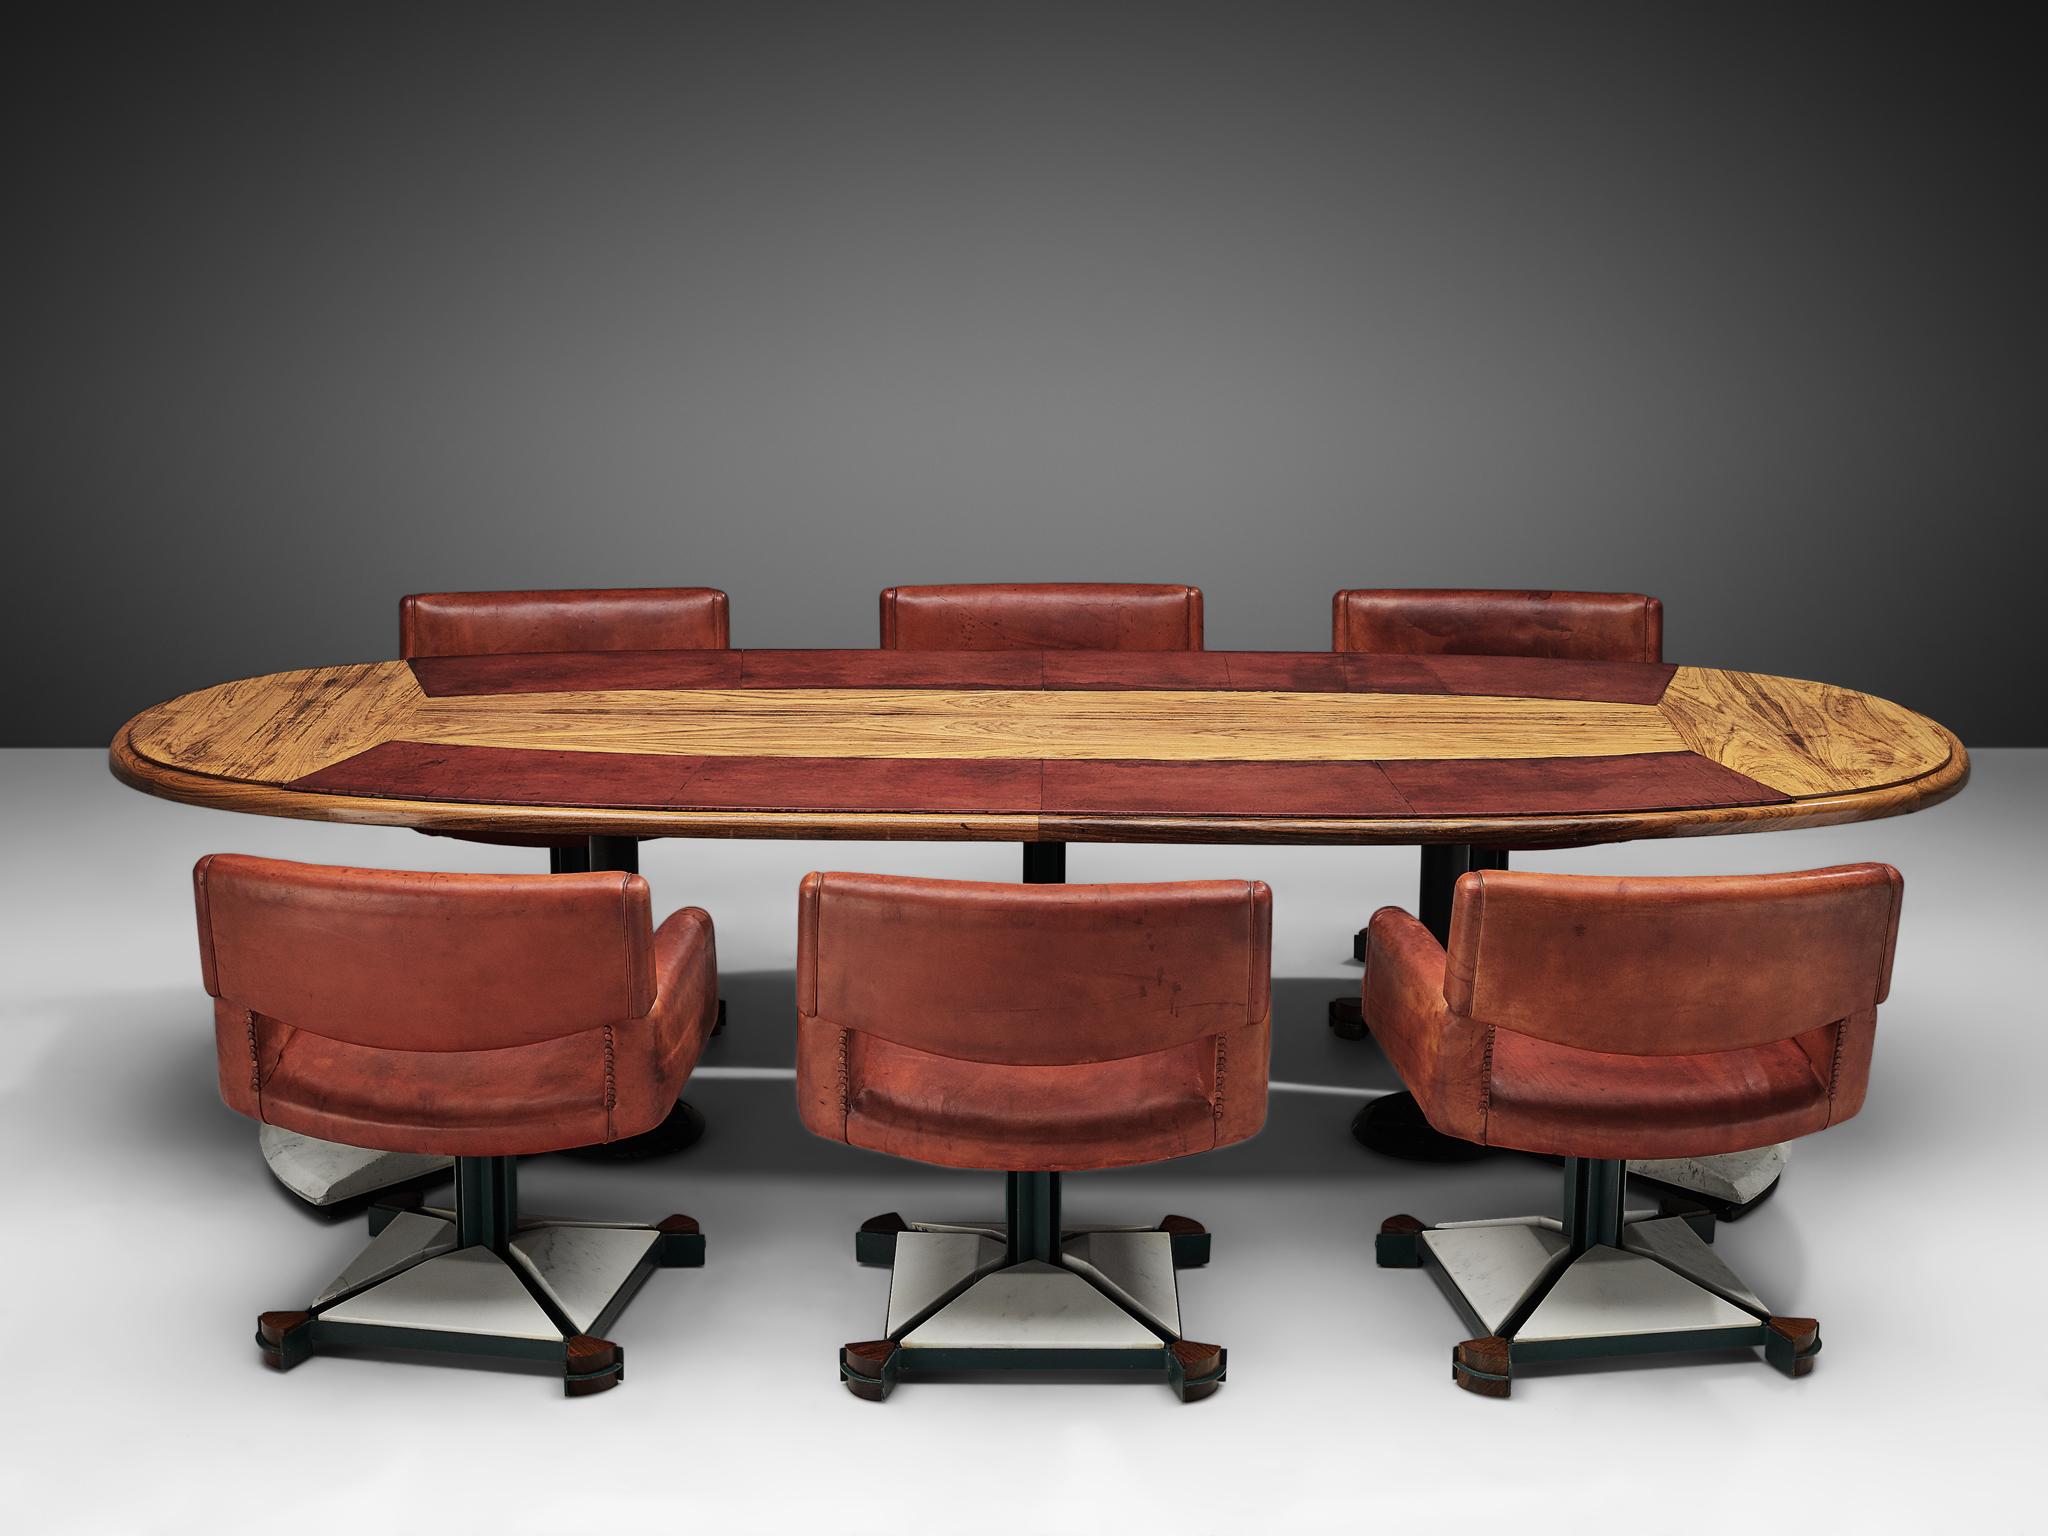 Italian Set of Conference Table and Chairs in Walnut and Red Leather